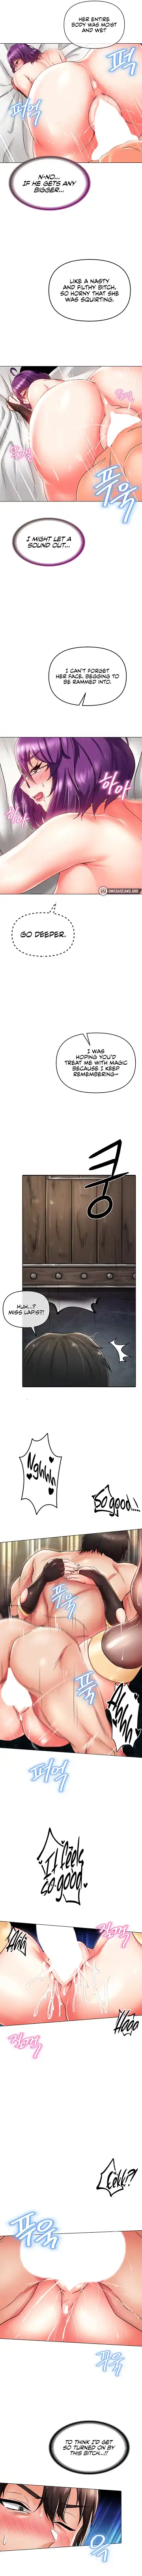 Welcome to the Isekai Convenience Store Fhentai.net - Page 41